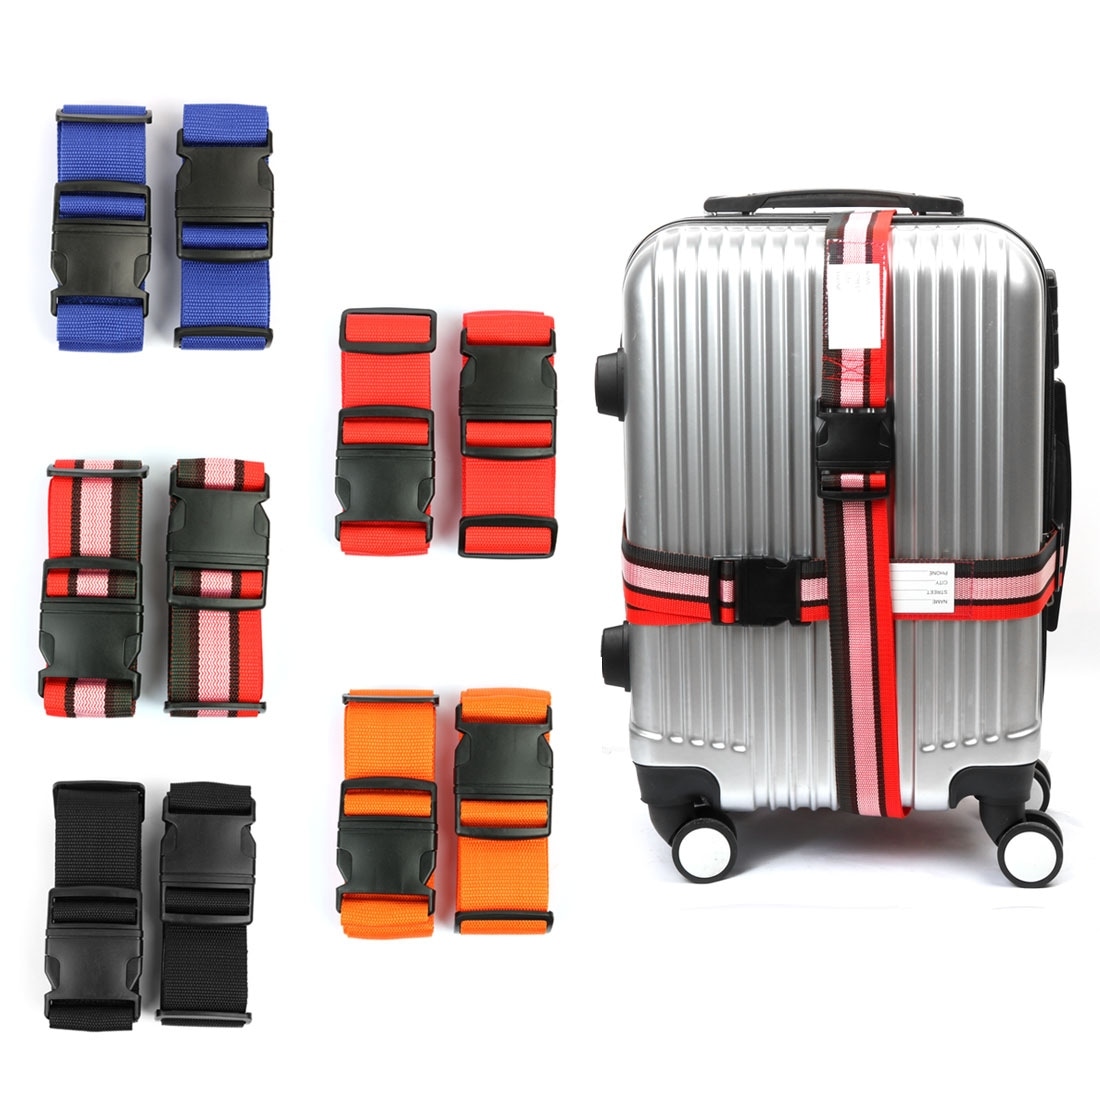 Travel Case Accessories Black Luggage Belts Suitcase Straps Adjustable and Durable 2 Pack